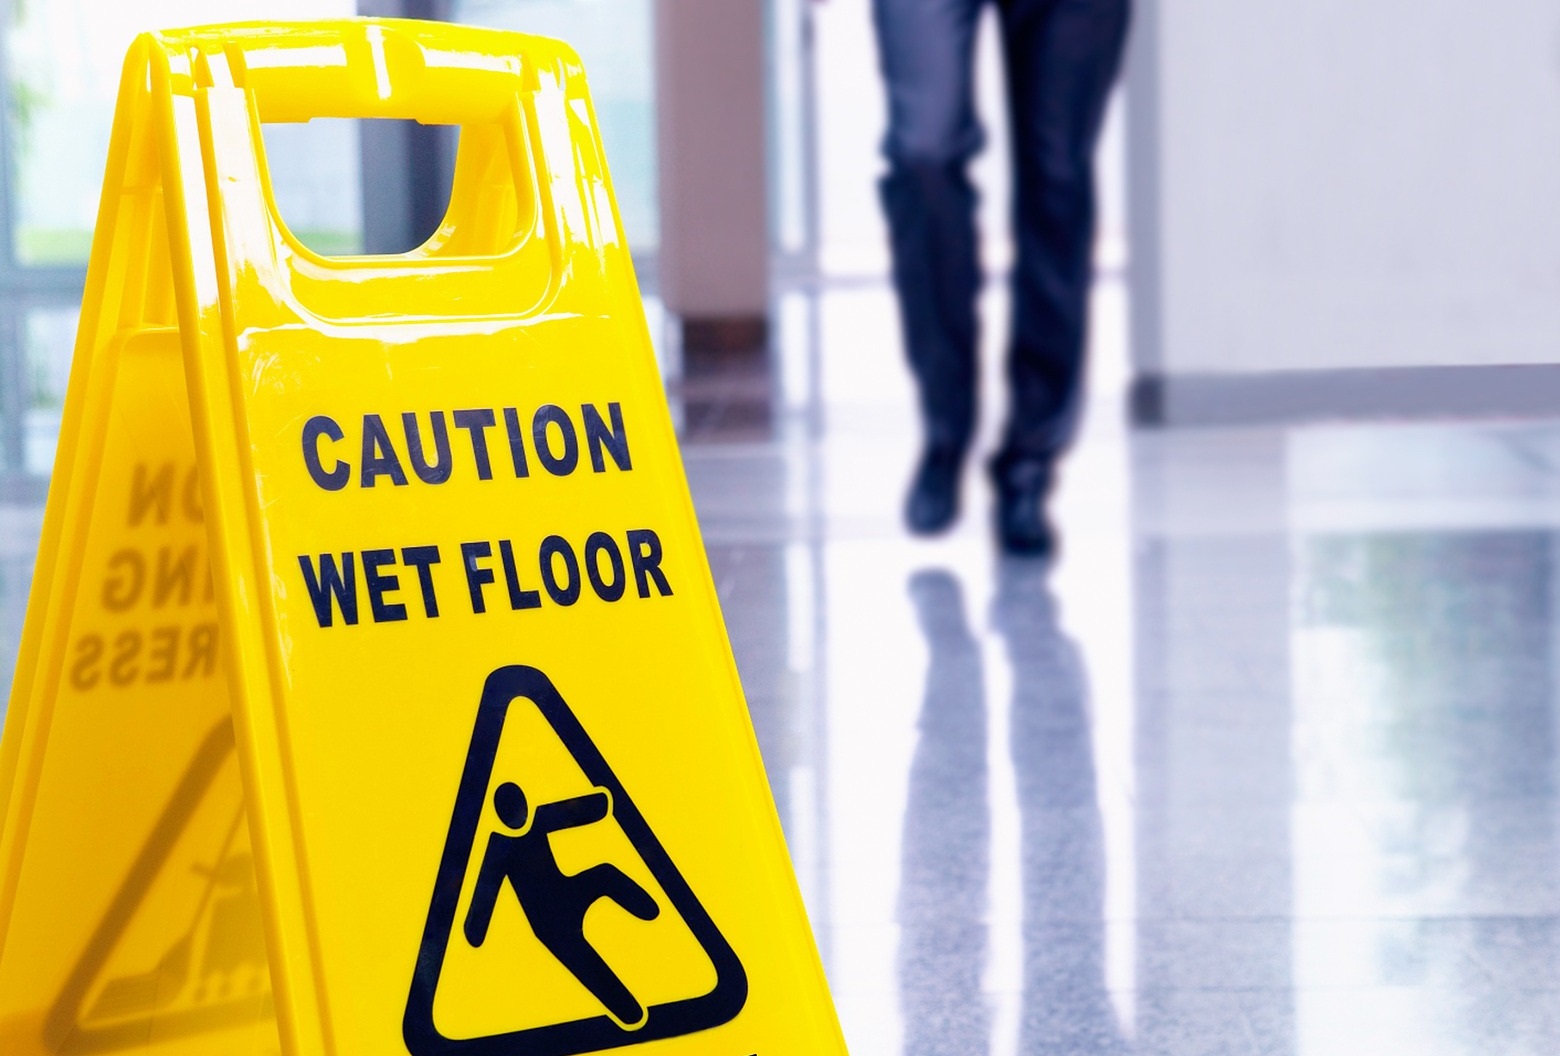 How Do You Know? Slip and Fall Cases in Miami, Florida